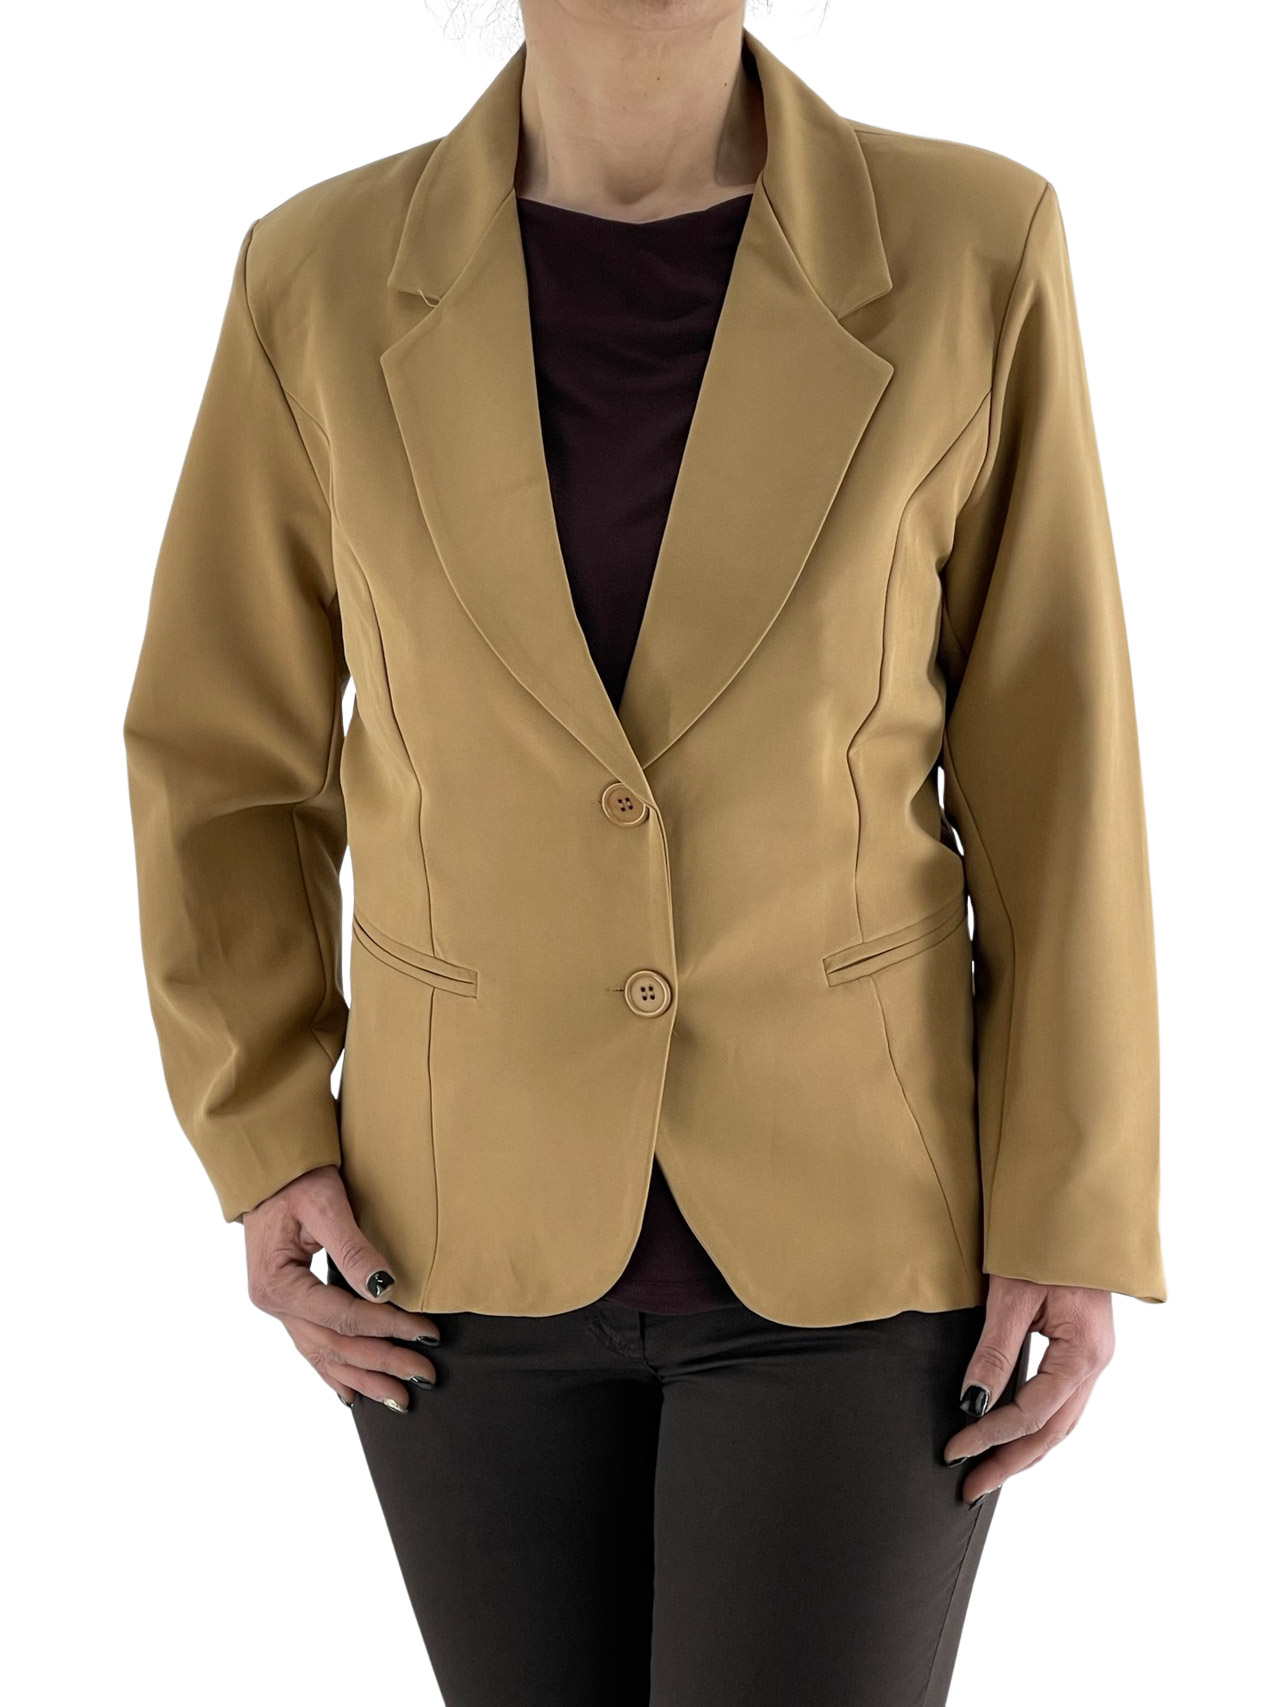 Women's jacket with a jacket code 10465